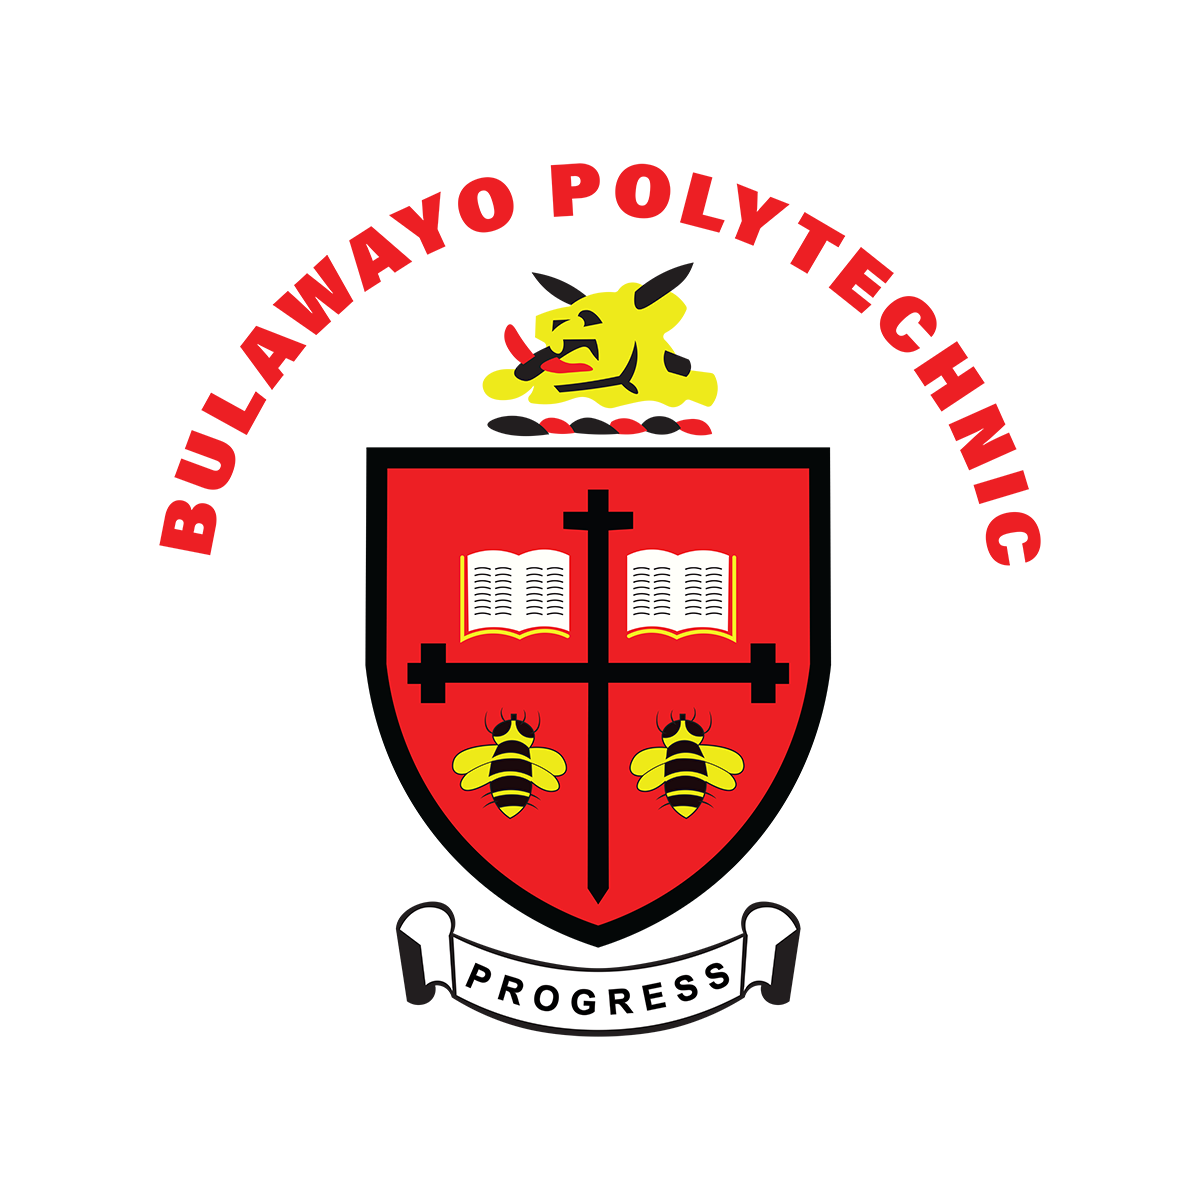 Read more about the article Bulawayo Polytechnic Logo